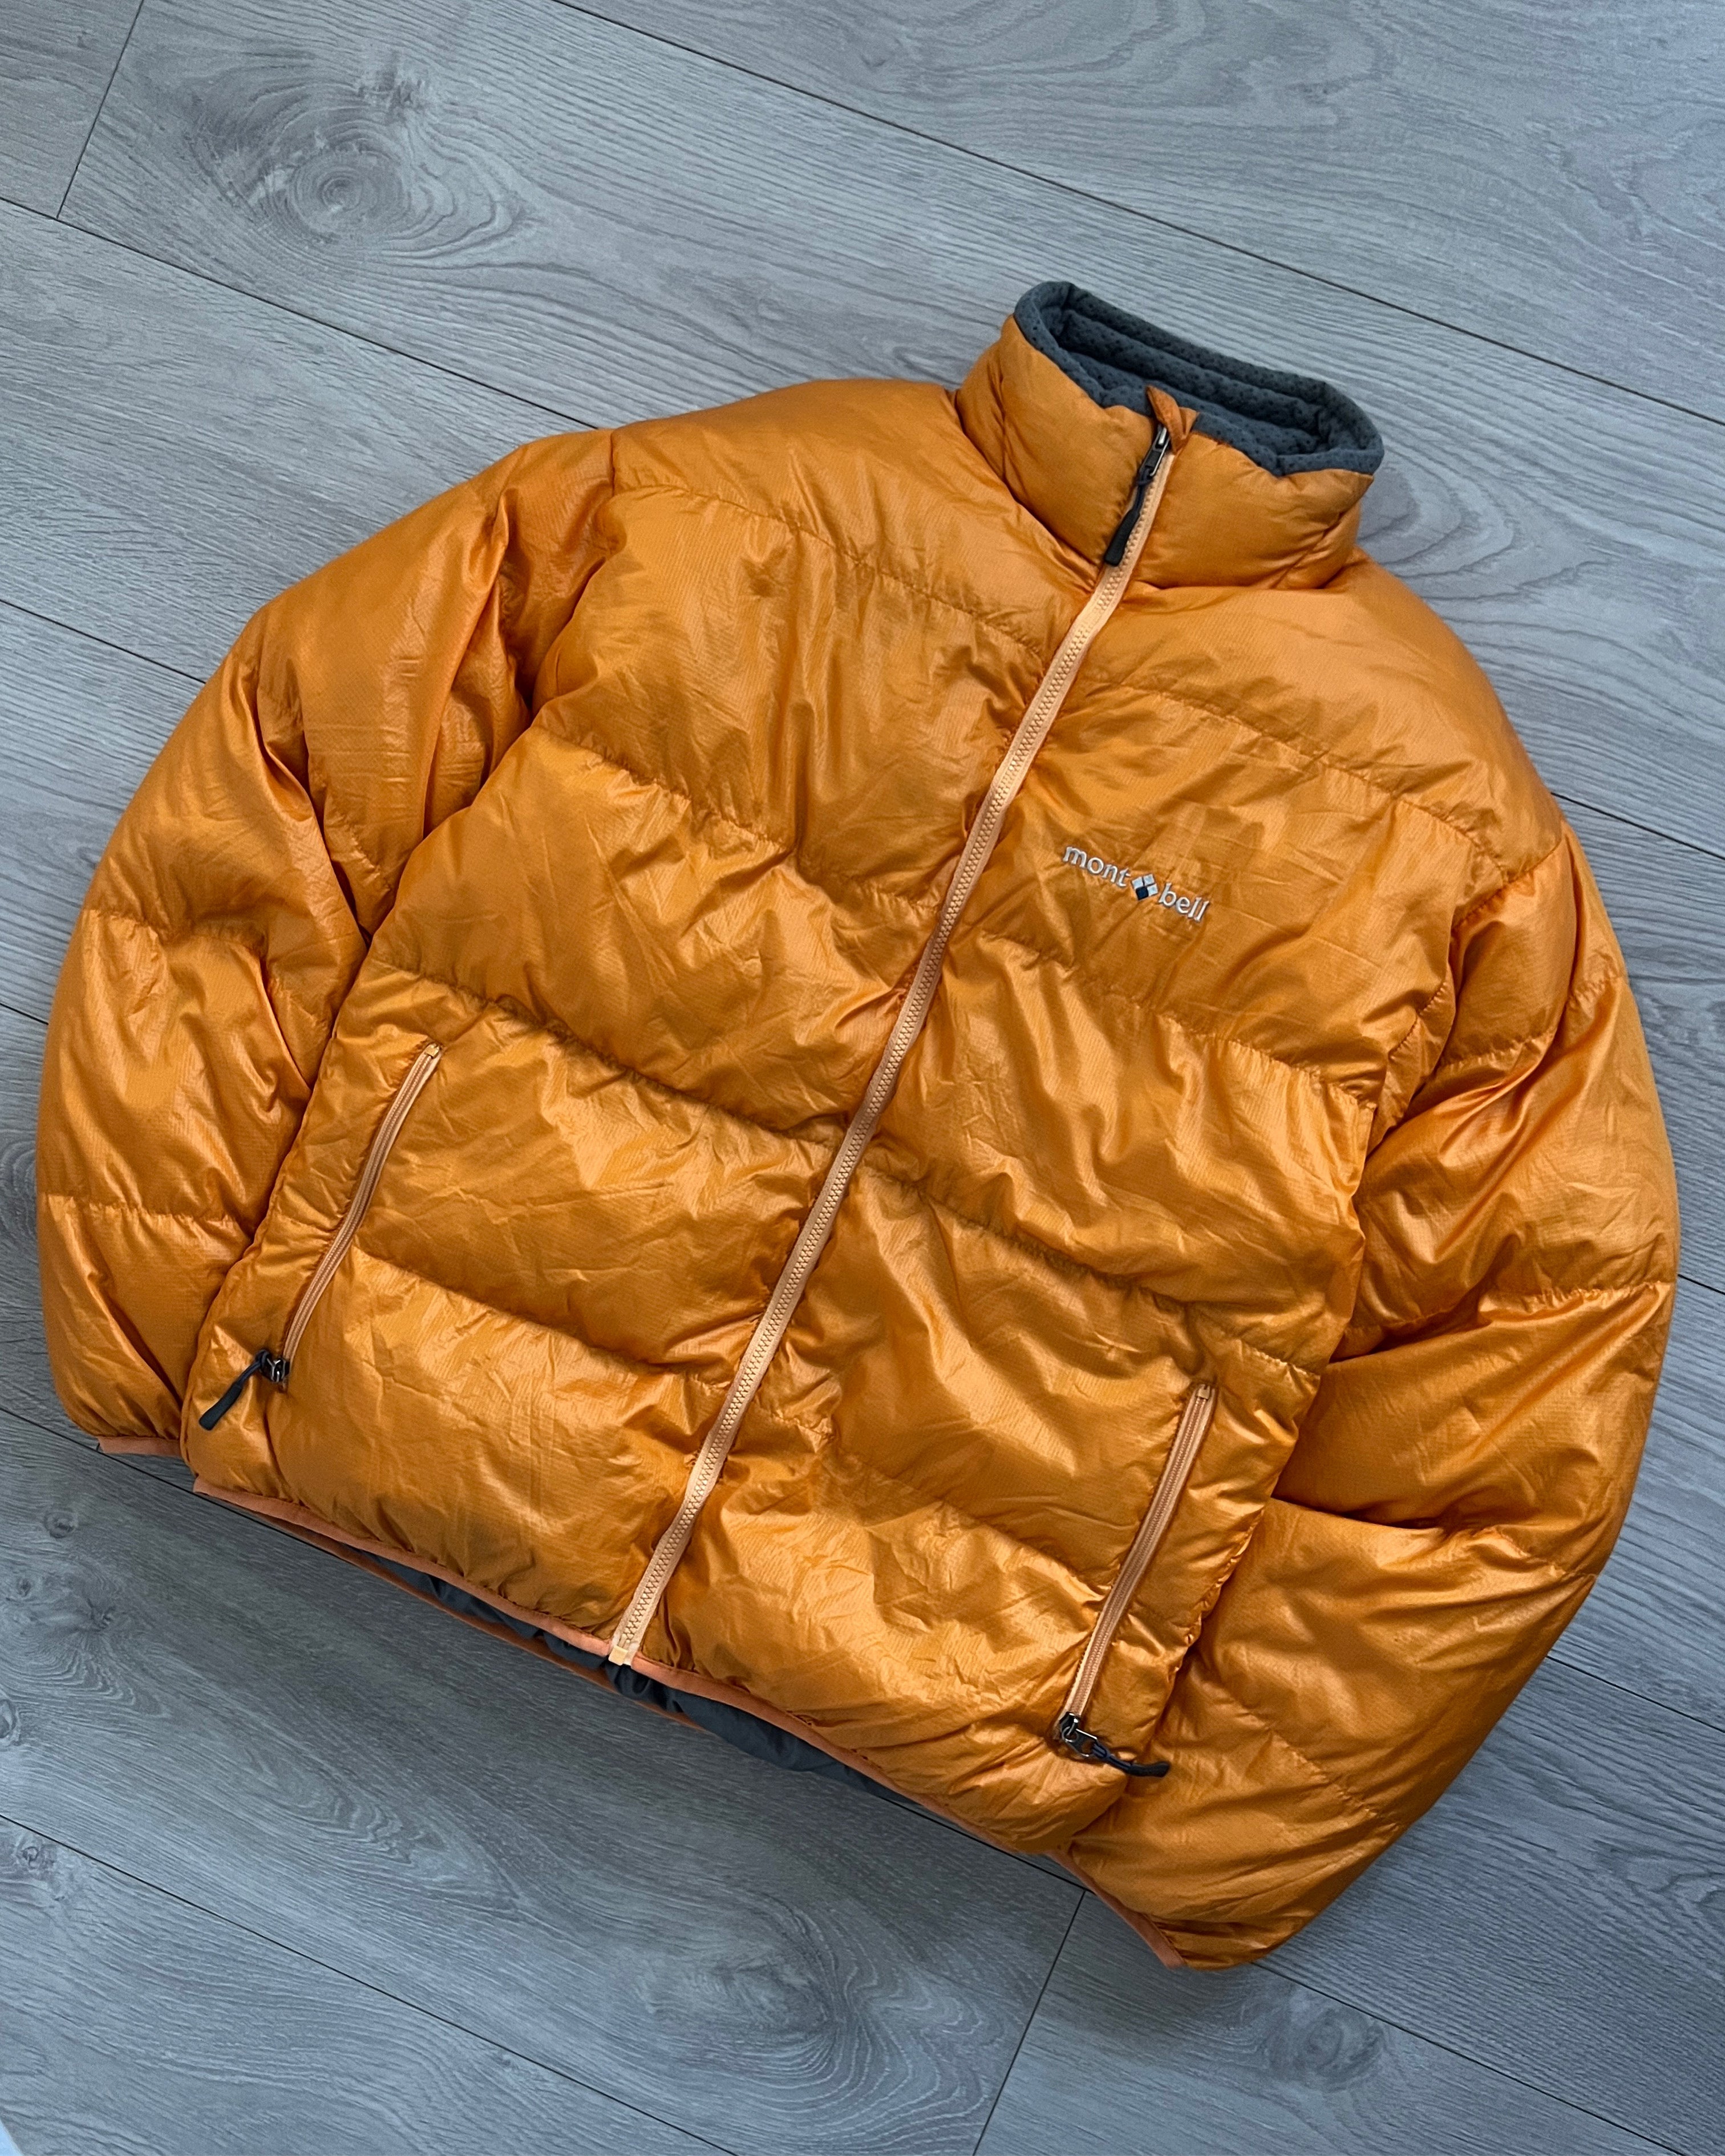 Montbell Puffer Jacket (S) – PASTDOWN